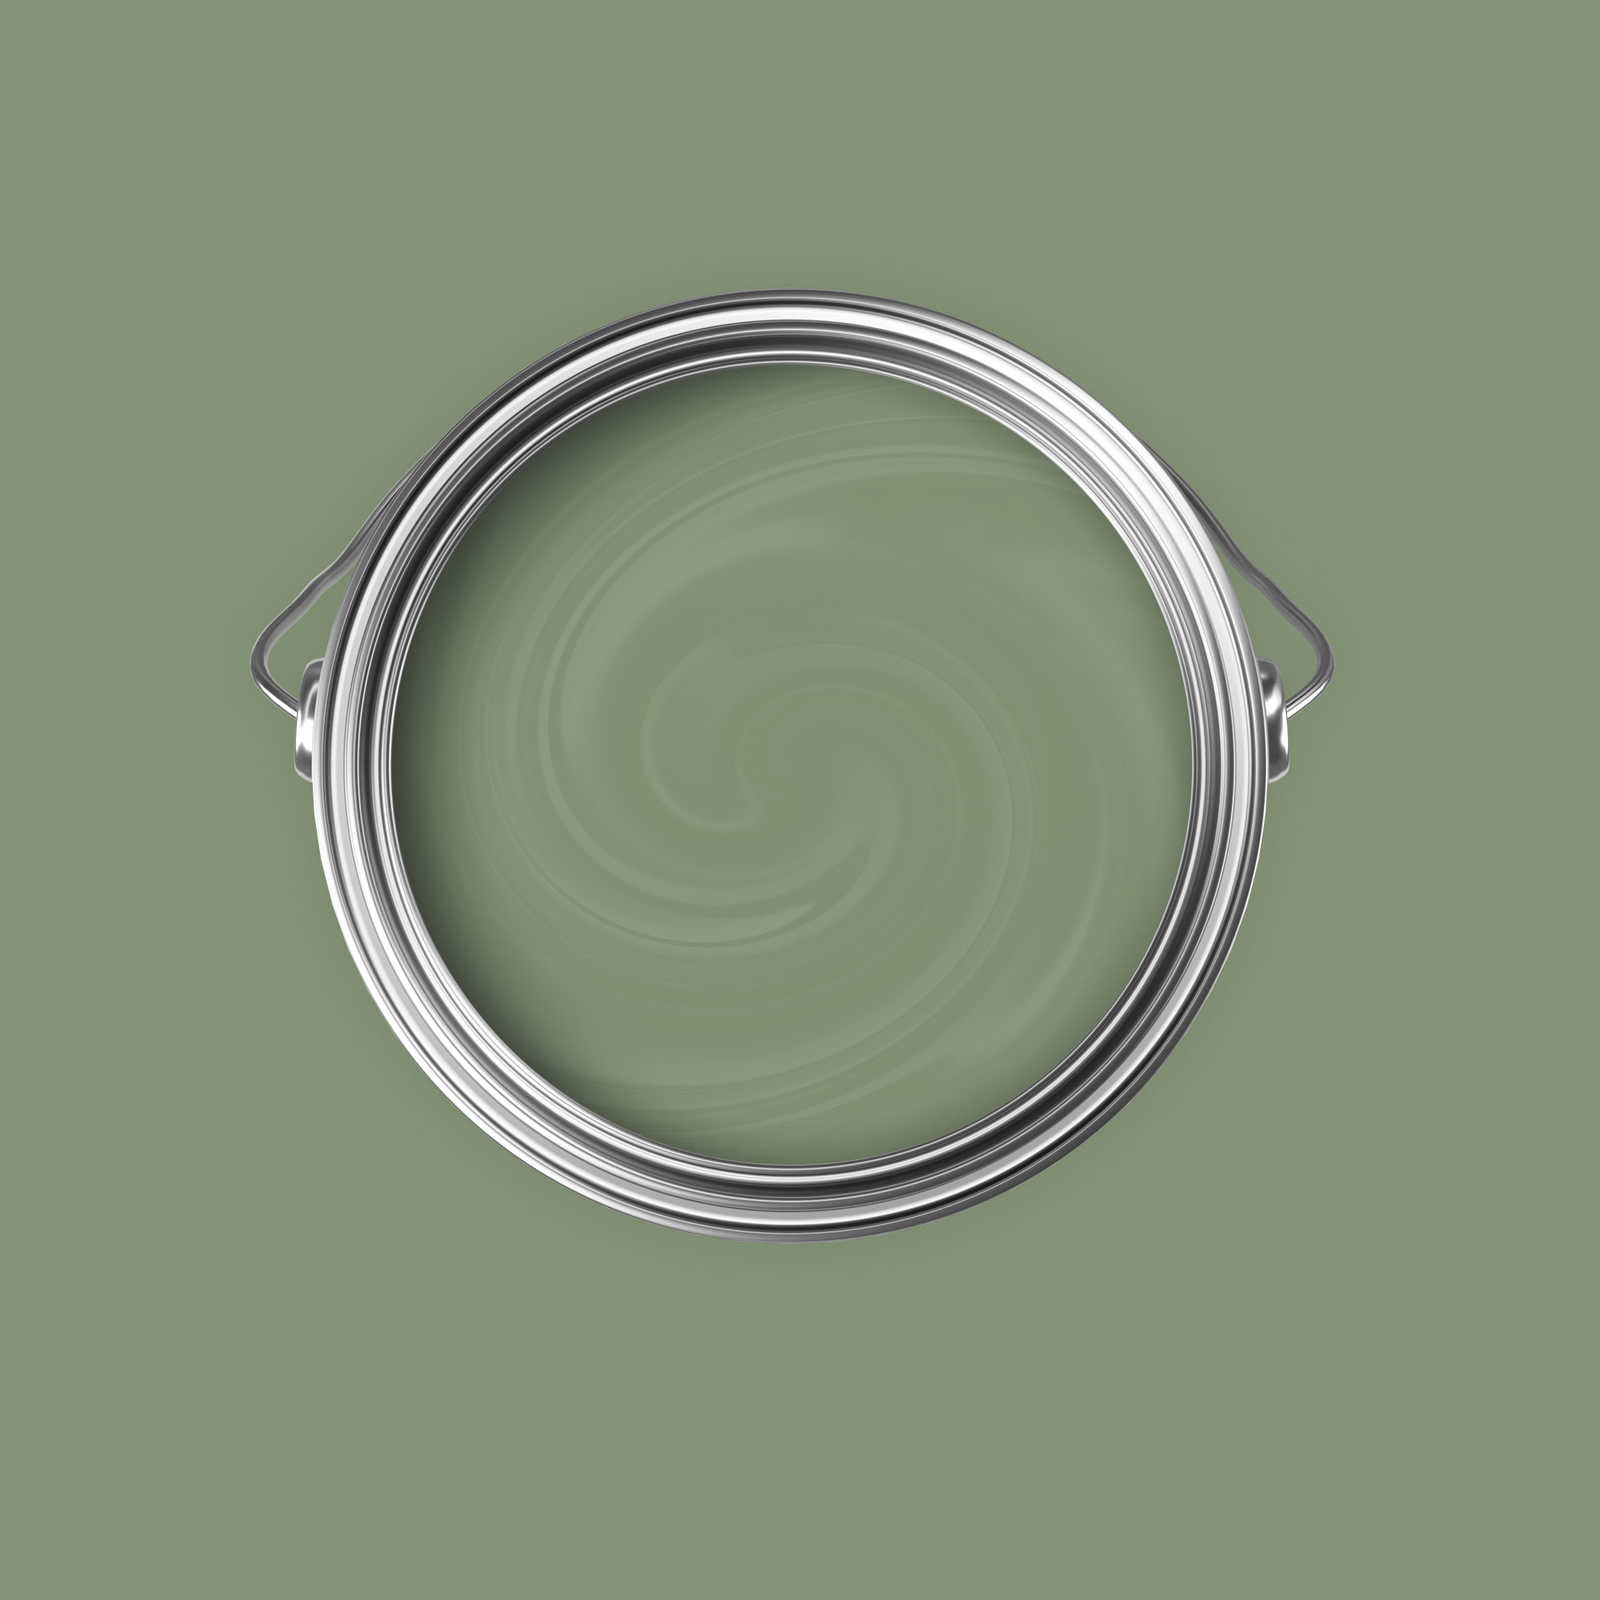             Premium Wall Paint Nature Olive Green »Gorgeous Green« NW503 – 5 litre
        